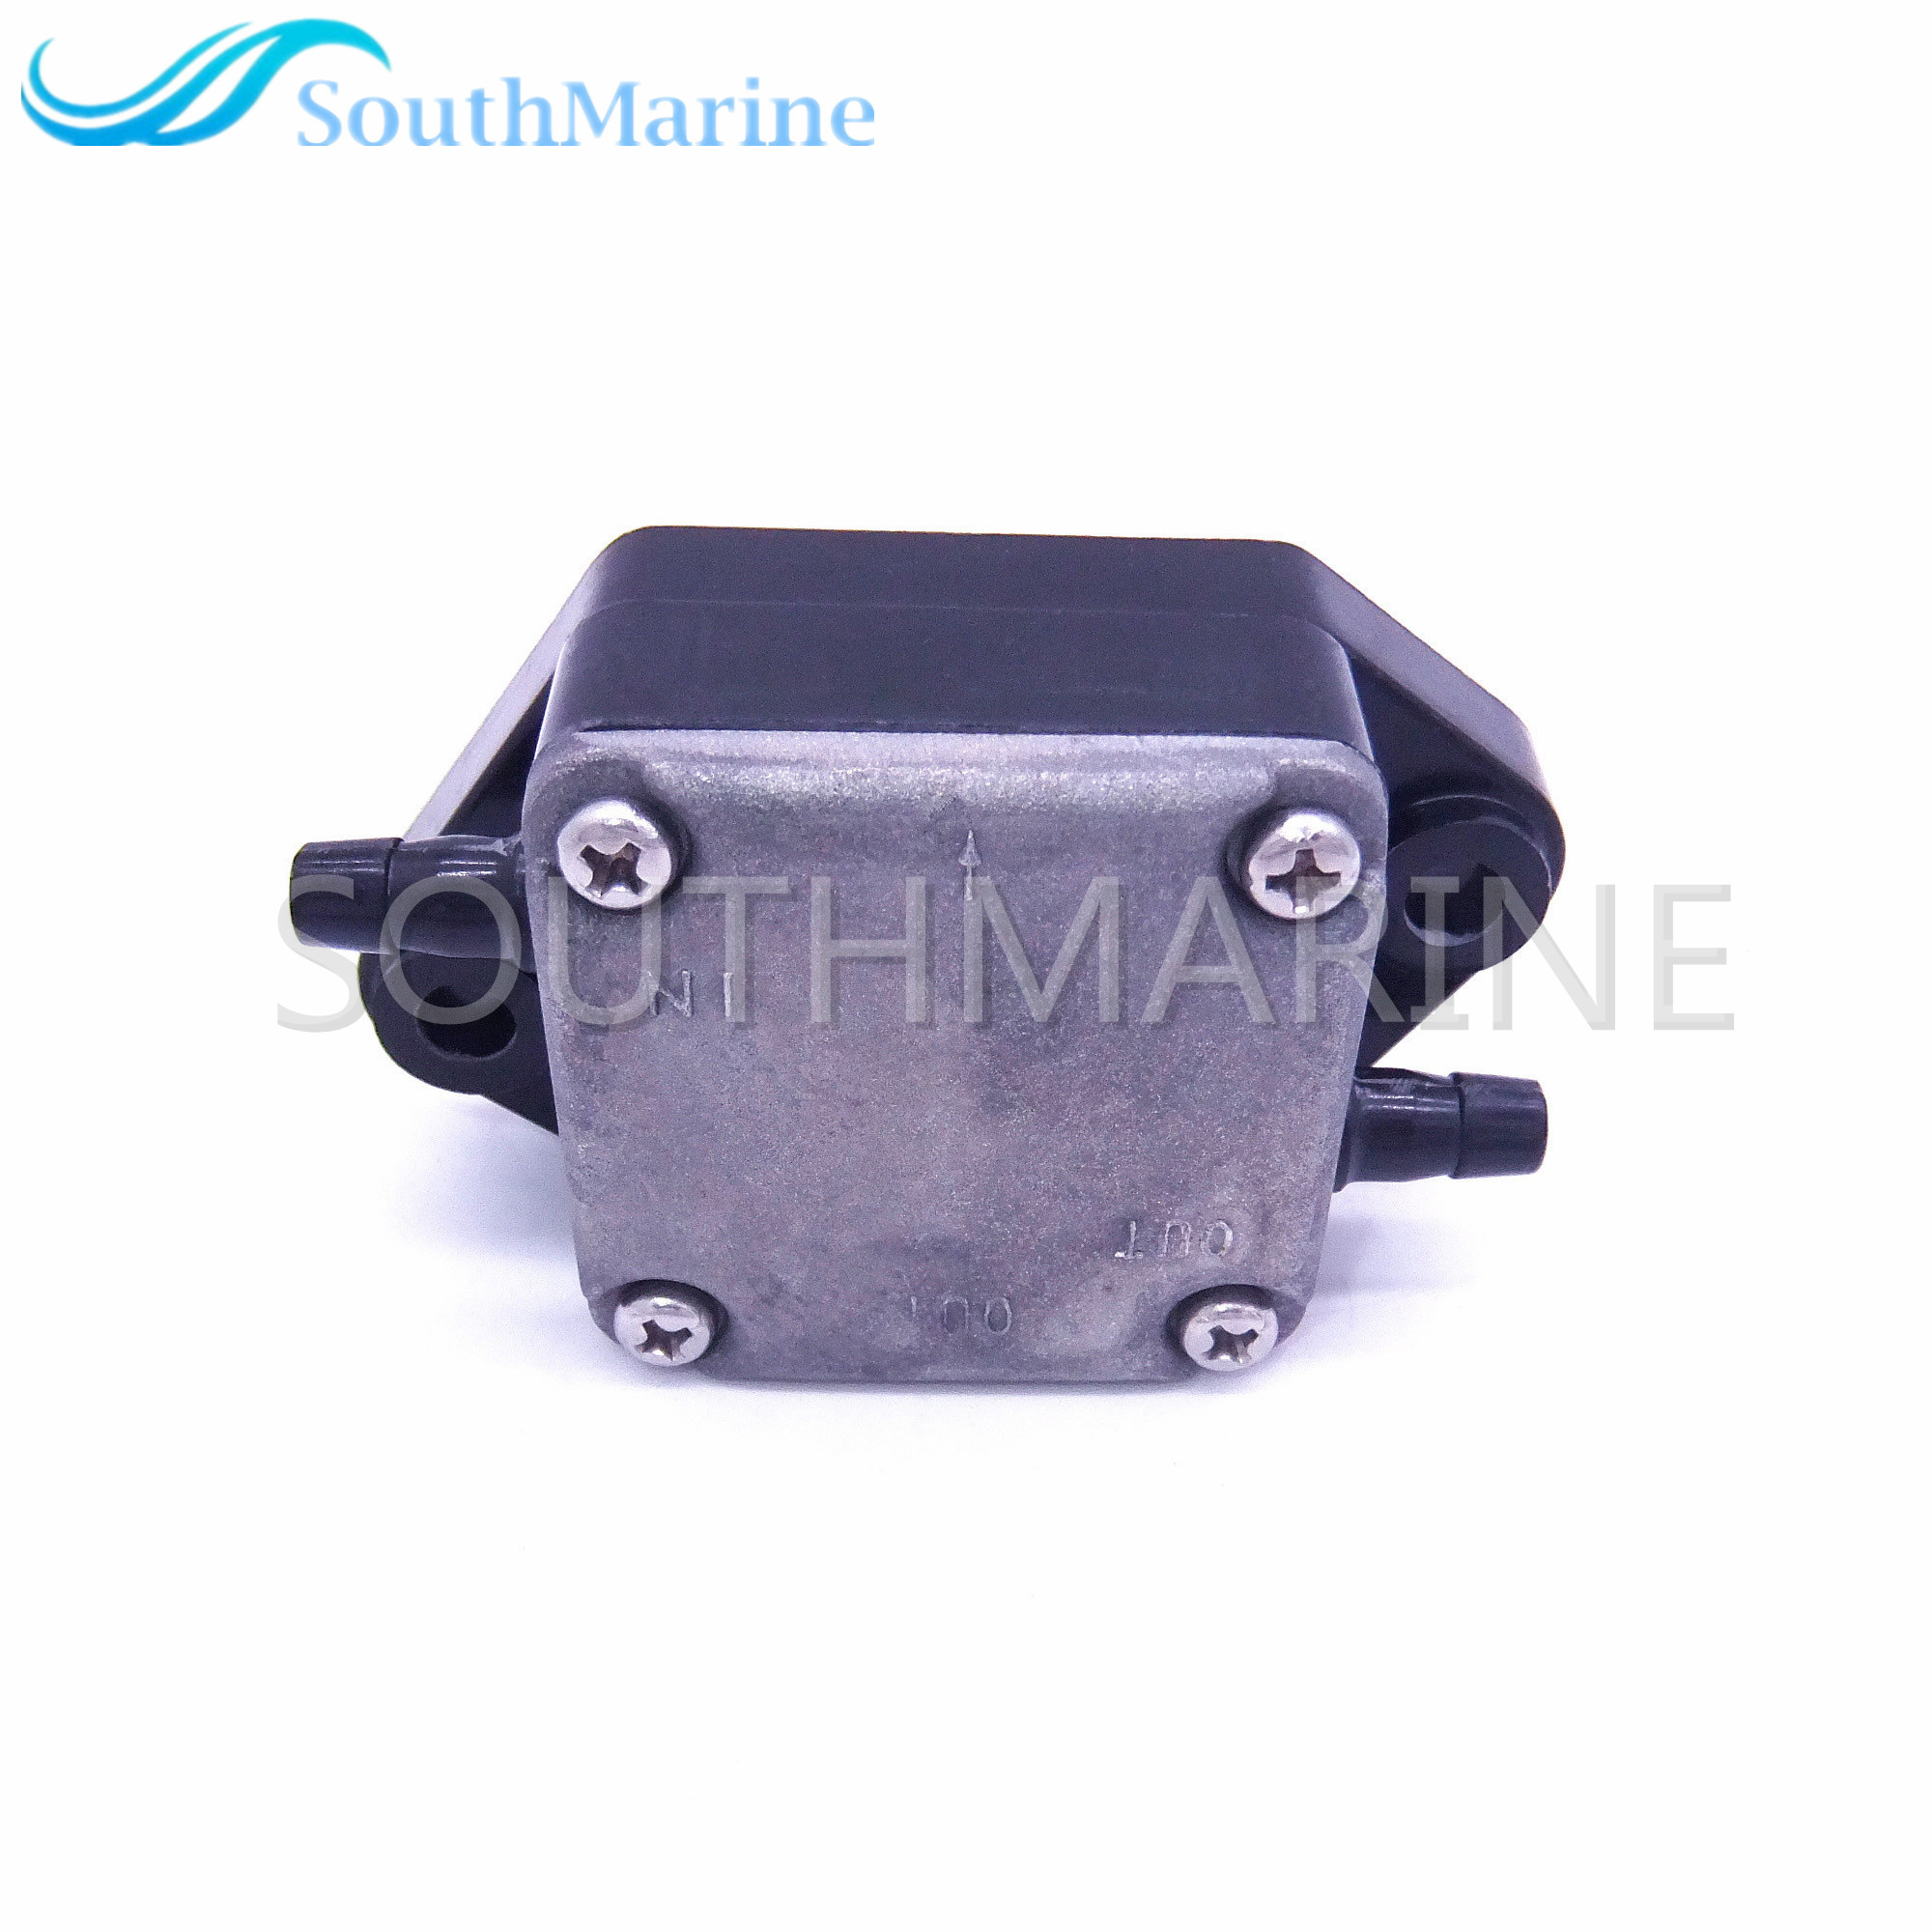 F8-05070000 Fuel Pump Assy for Parsun HDX 4-stroke F8 F9.8 Outboard Motors ,Free Shipping